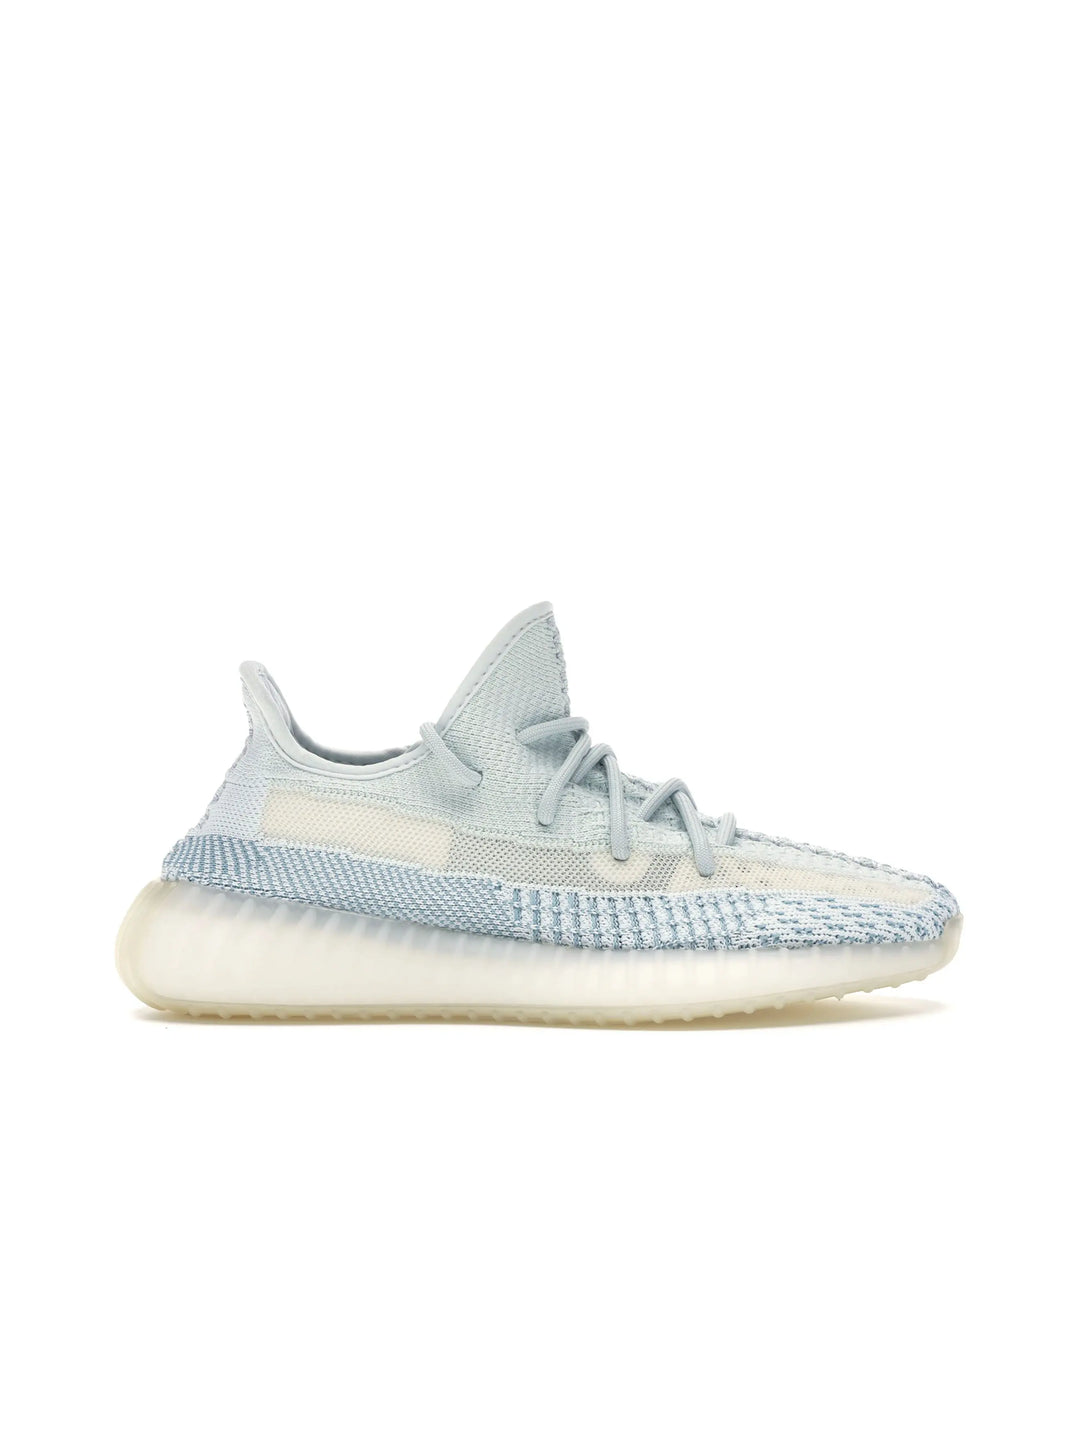 adidas Yeezy Boost 350 V2 Cloud White (Non-Reflective) in Auckland, New Zealand - Shop name